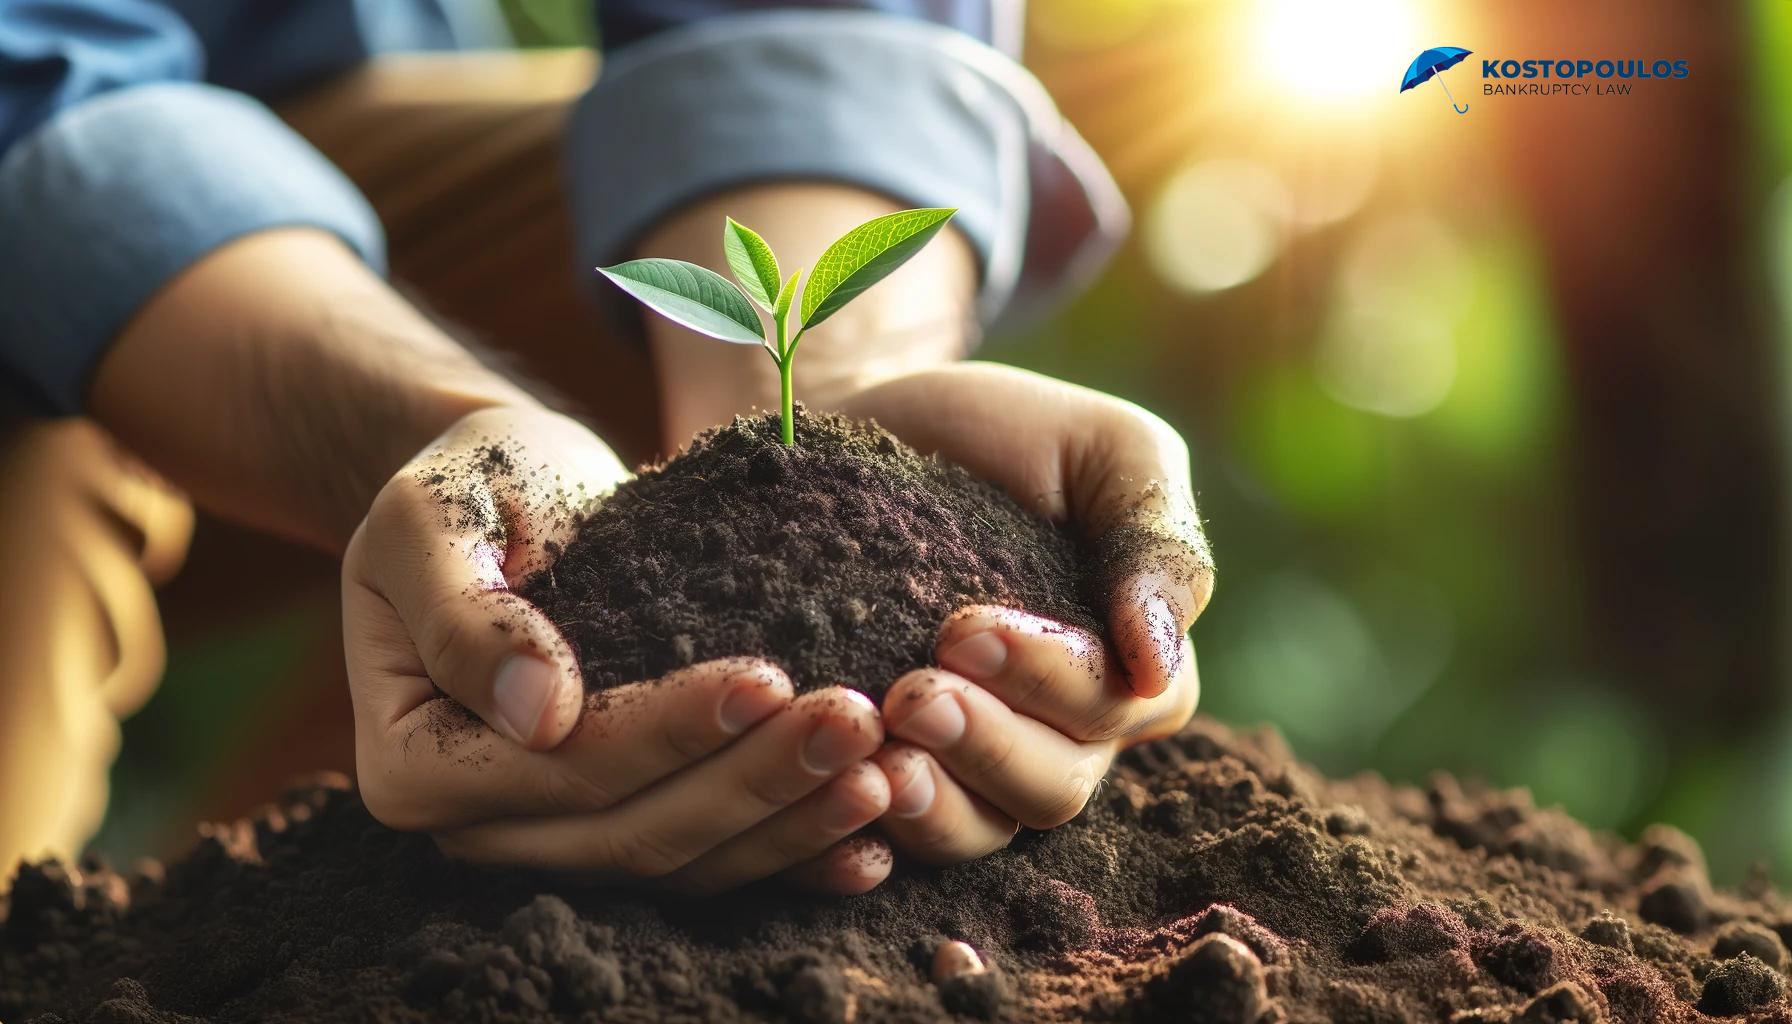 Hands holding a vibrant plant growing out of soil, symbolizing regrowth and the fresh start that comes after overcoming financial challenges.